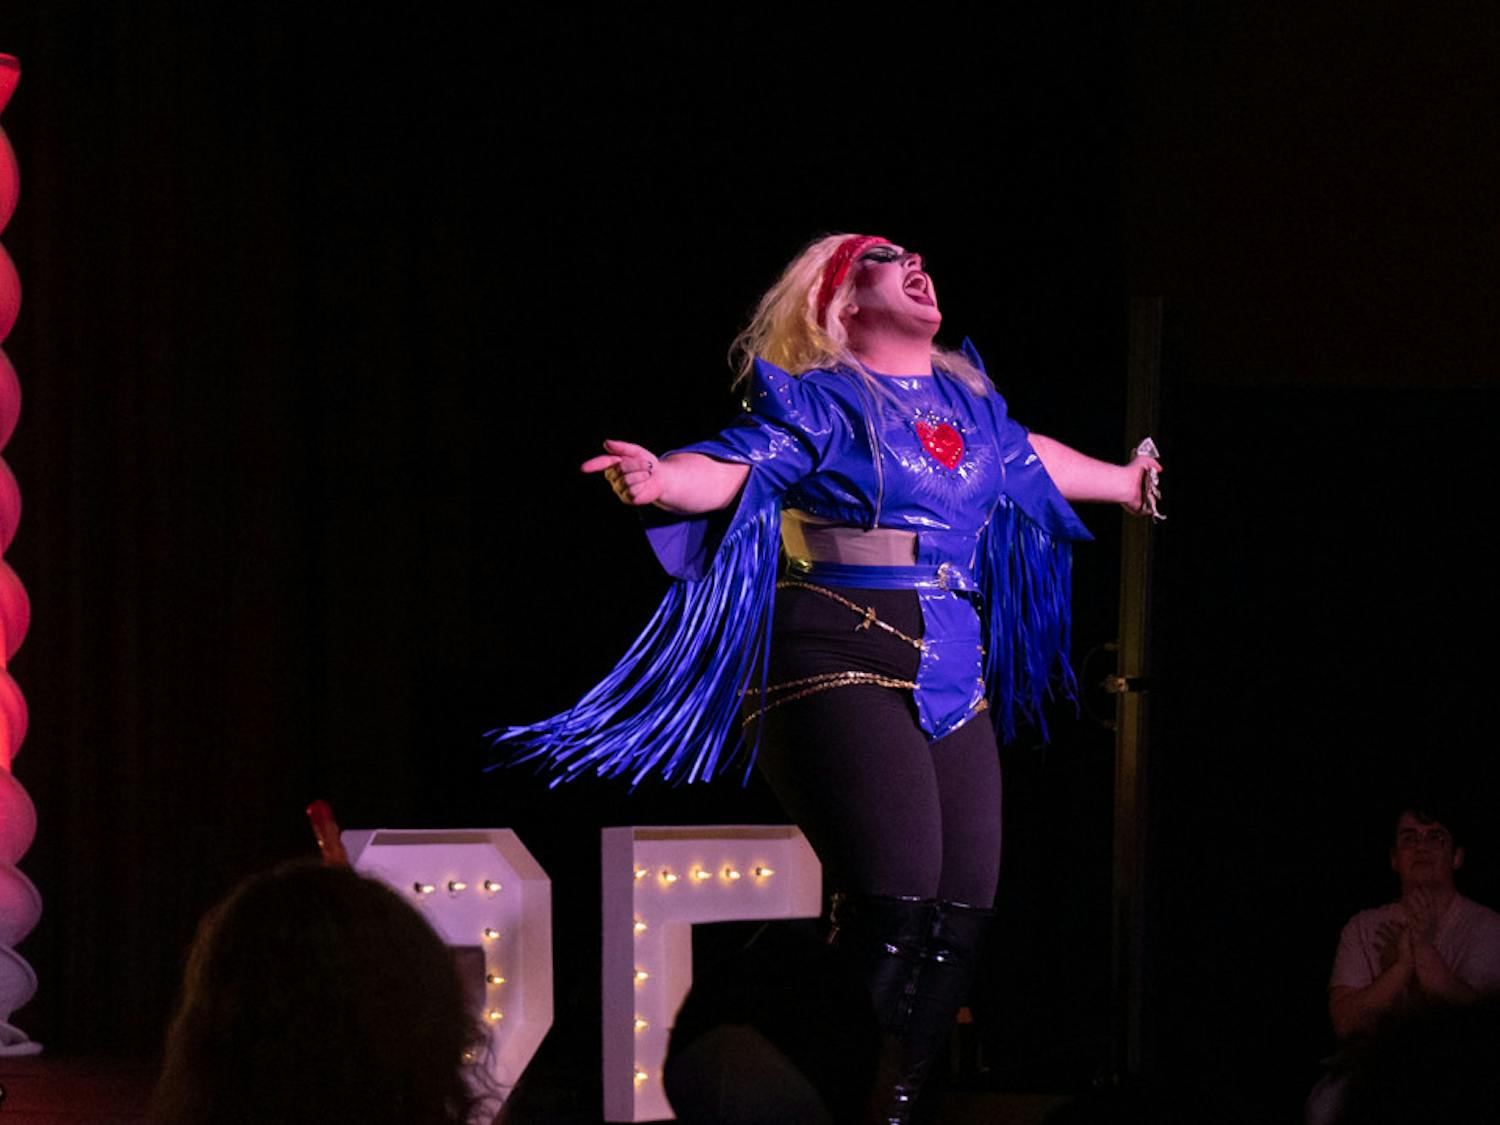 Gouda Judy sings to Lady Gaga's "Judas" during her set at USC's 25th Birdcage drag show. The show took place on April 12, 2023, and featured 18 queens and kings.